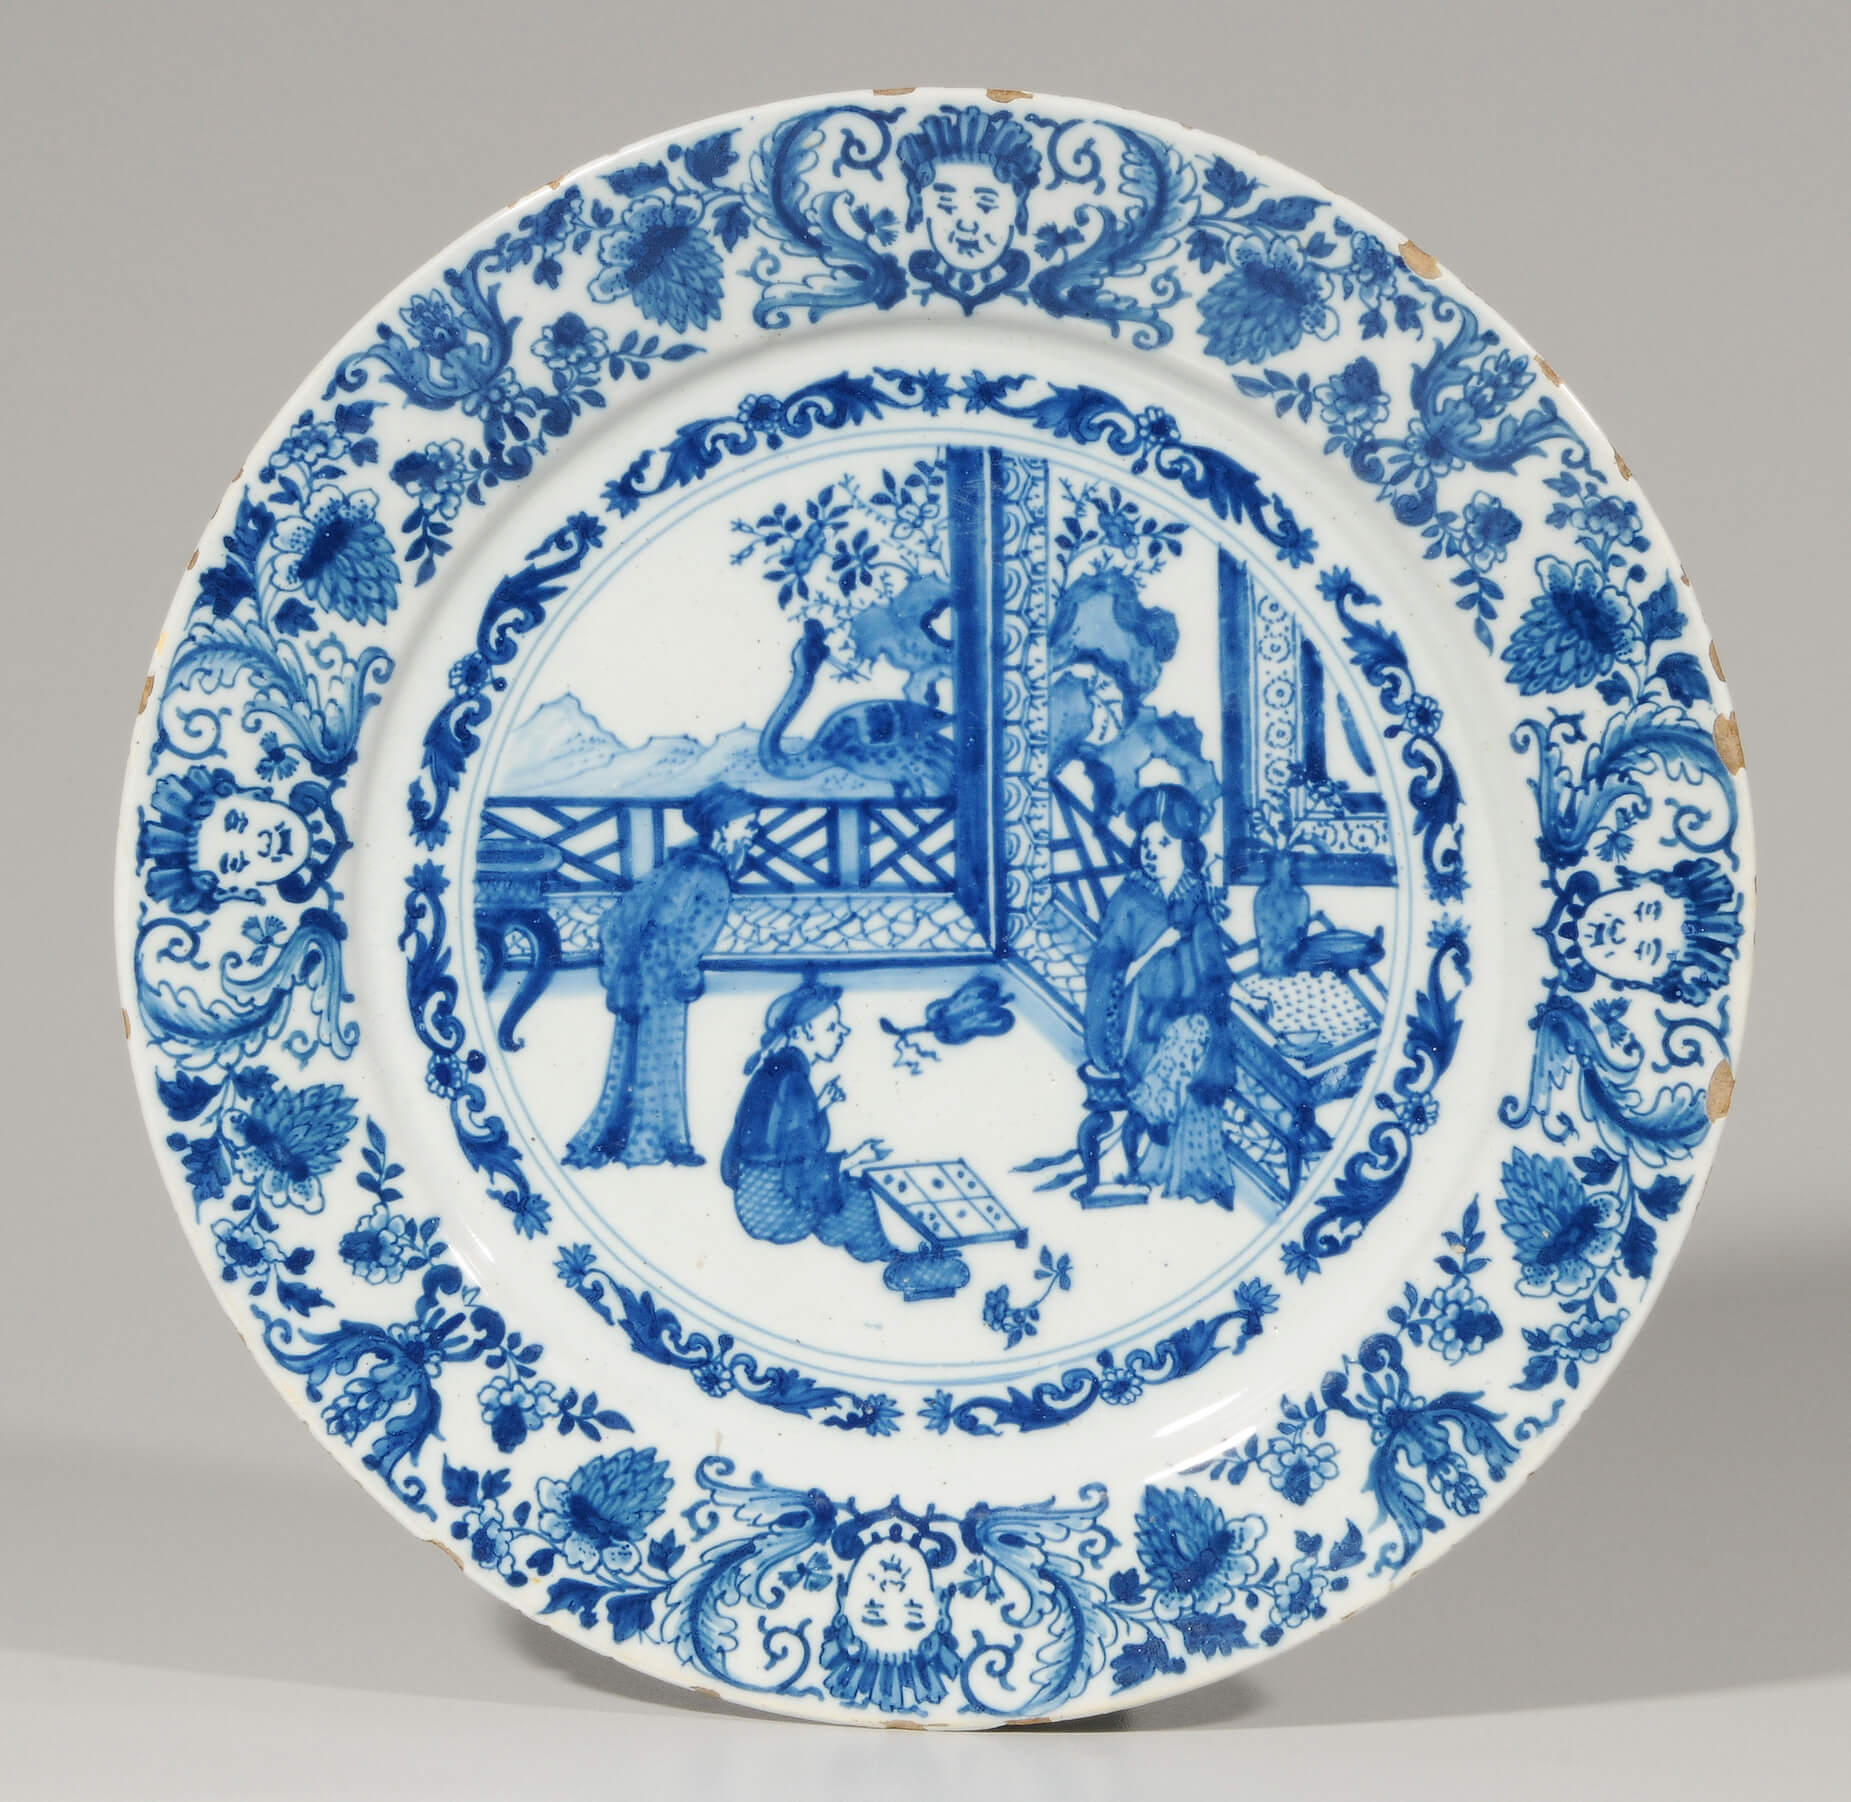 Delftware blue and white Chinoiserie plate